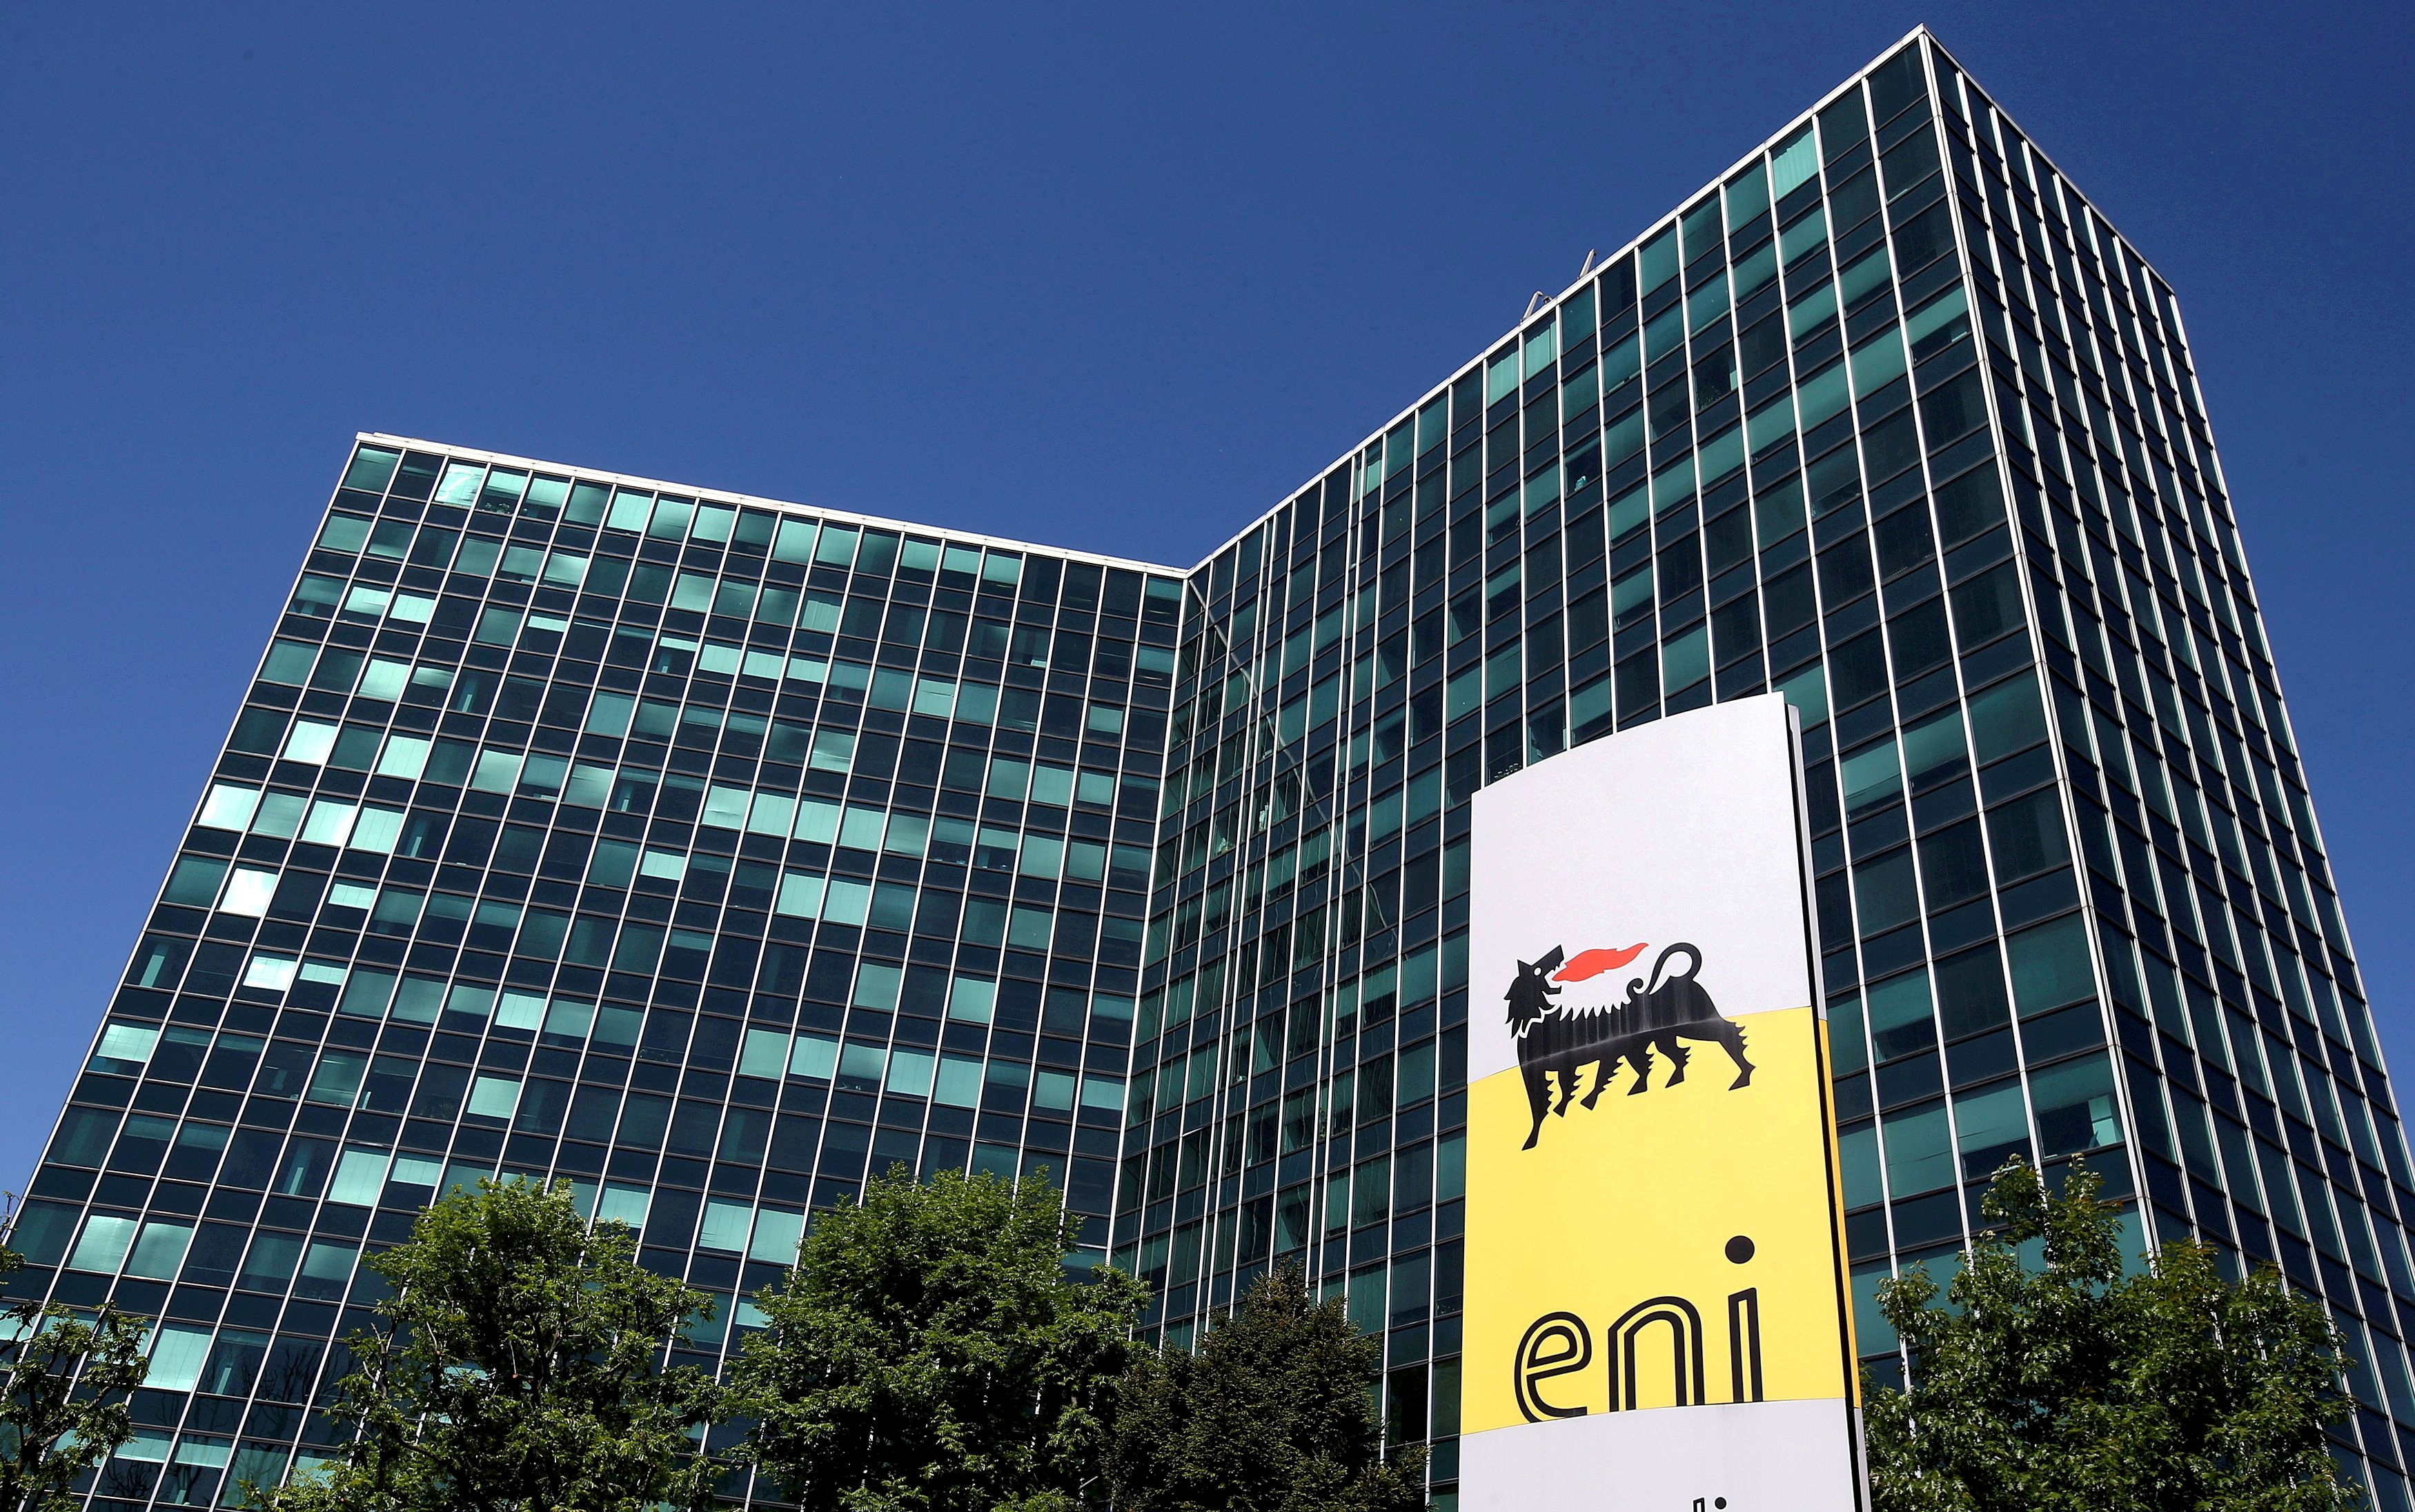 Eni's logo is seen in front of its headquarters in San Donato Milanese, near Milan, Italy, April 27, 2016.  REUTERS/Stefano Rellandini/File Photo